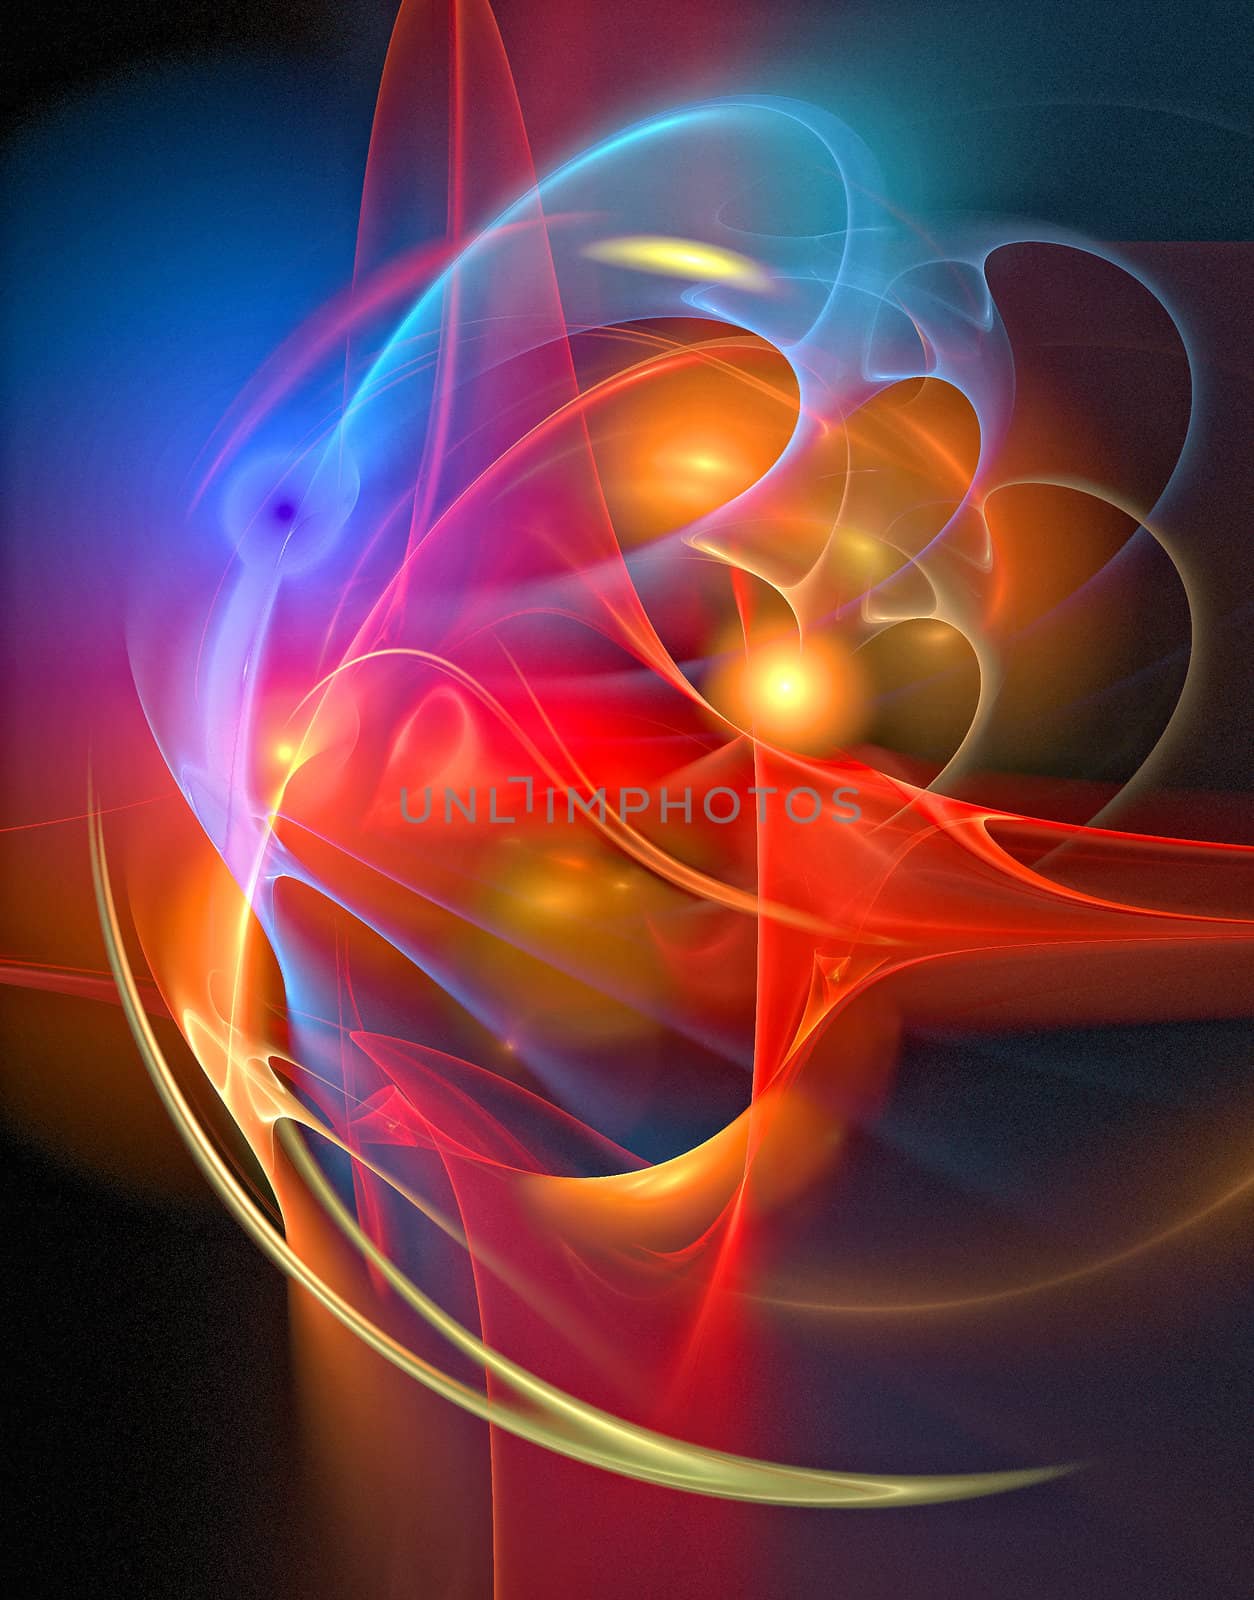 Colored abstract background made with several fractals